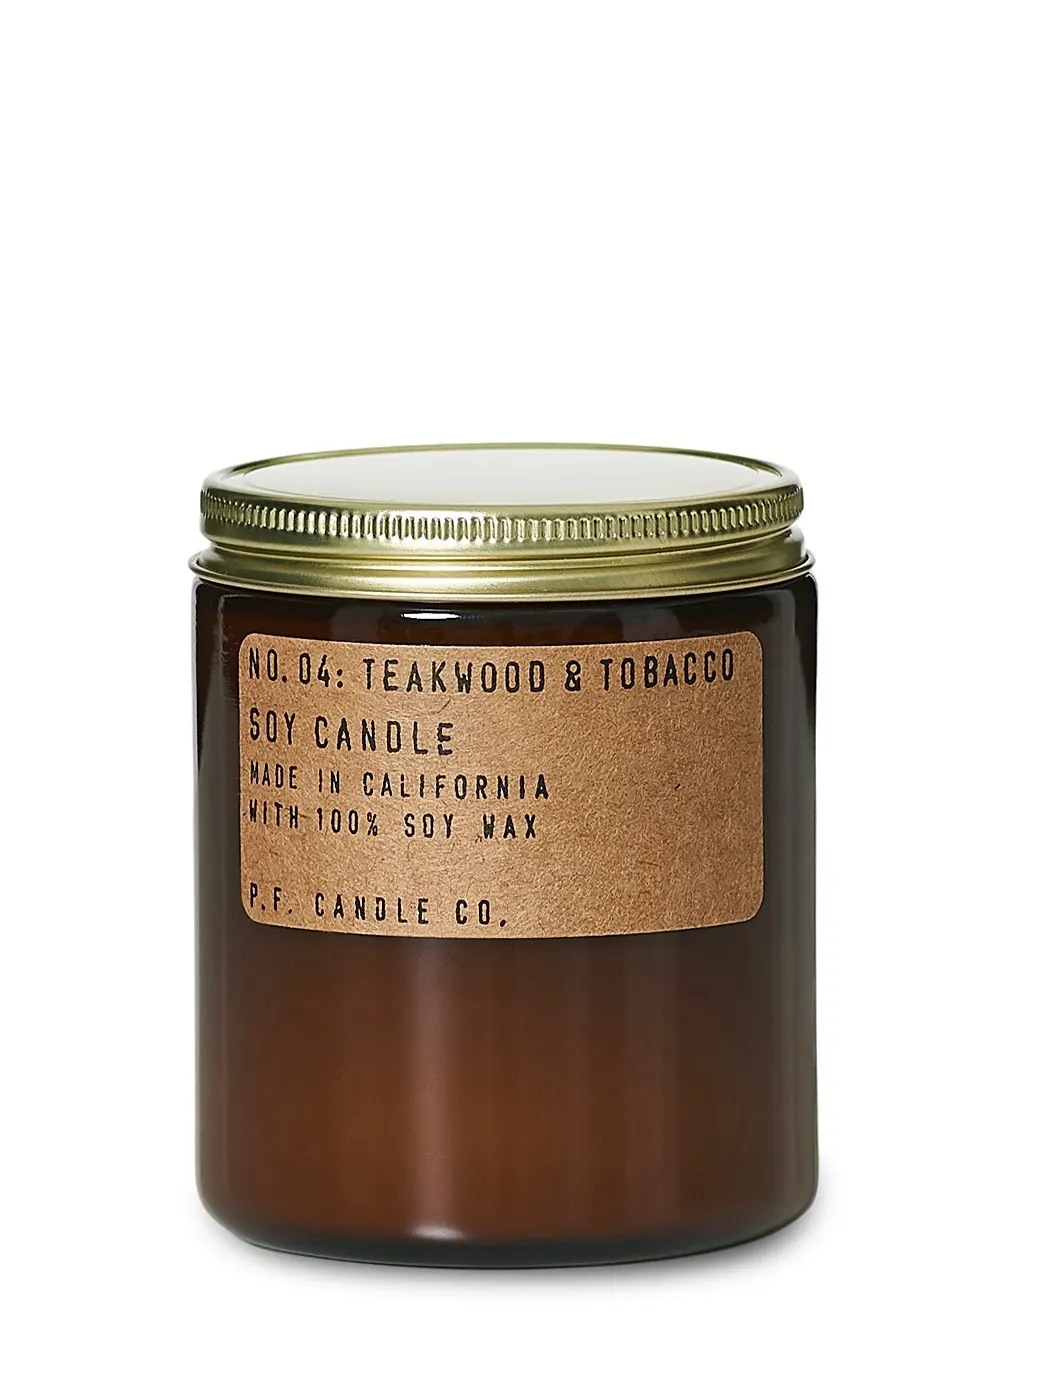 Teakwood and Tobacco - scented soy candle, standard size